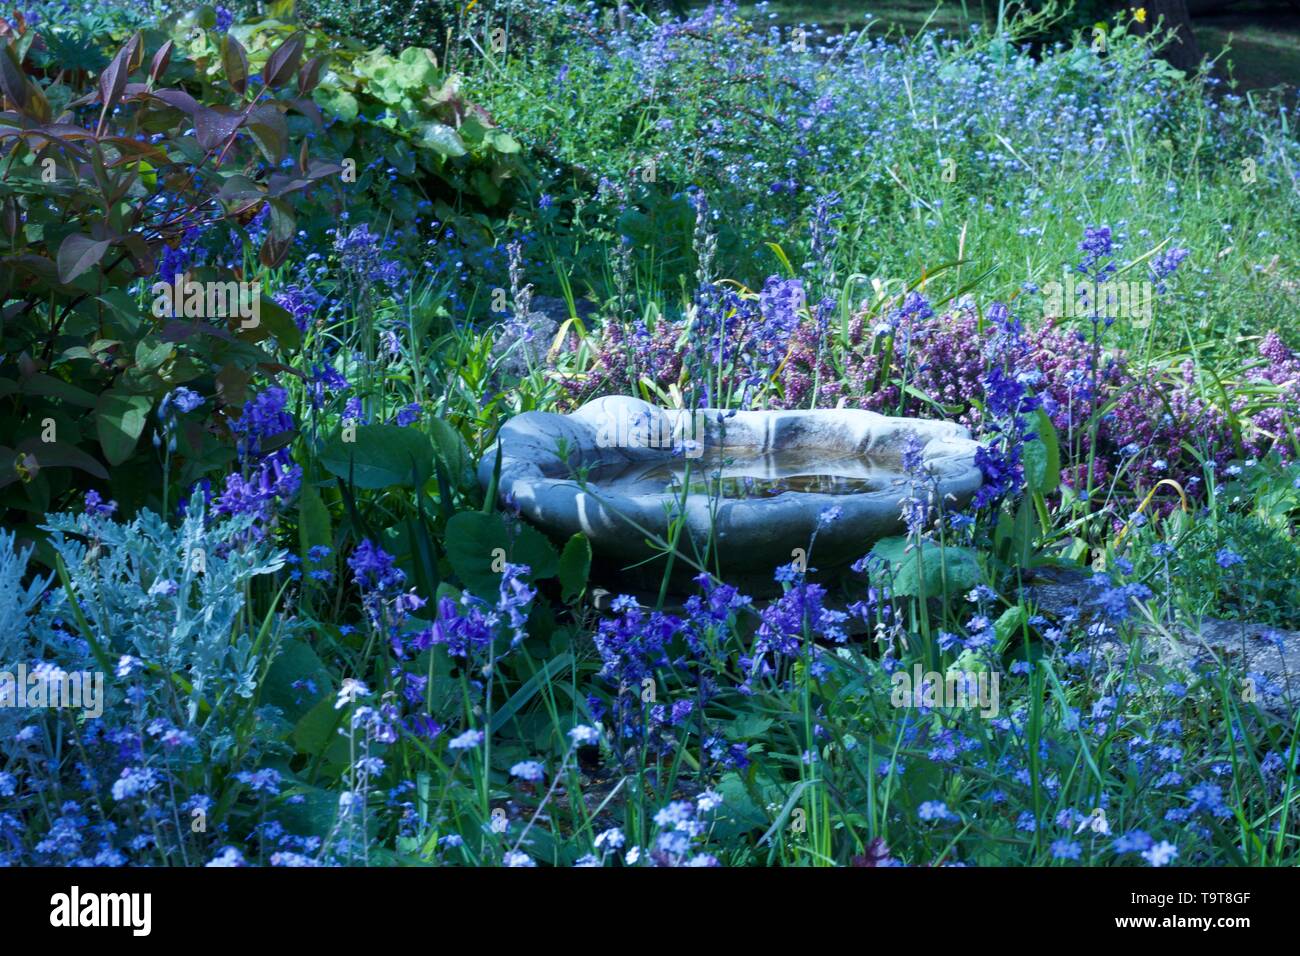 Lush garden with stone bird bath surrounded by lovely spring flowers Stock Photo